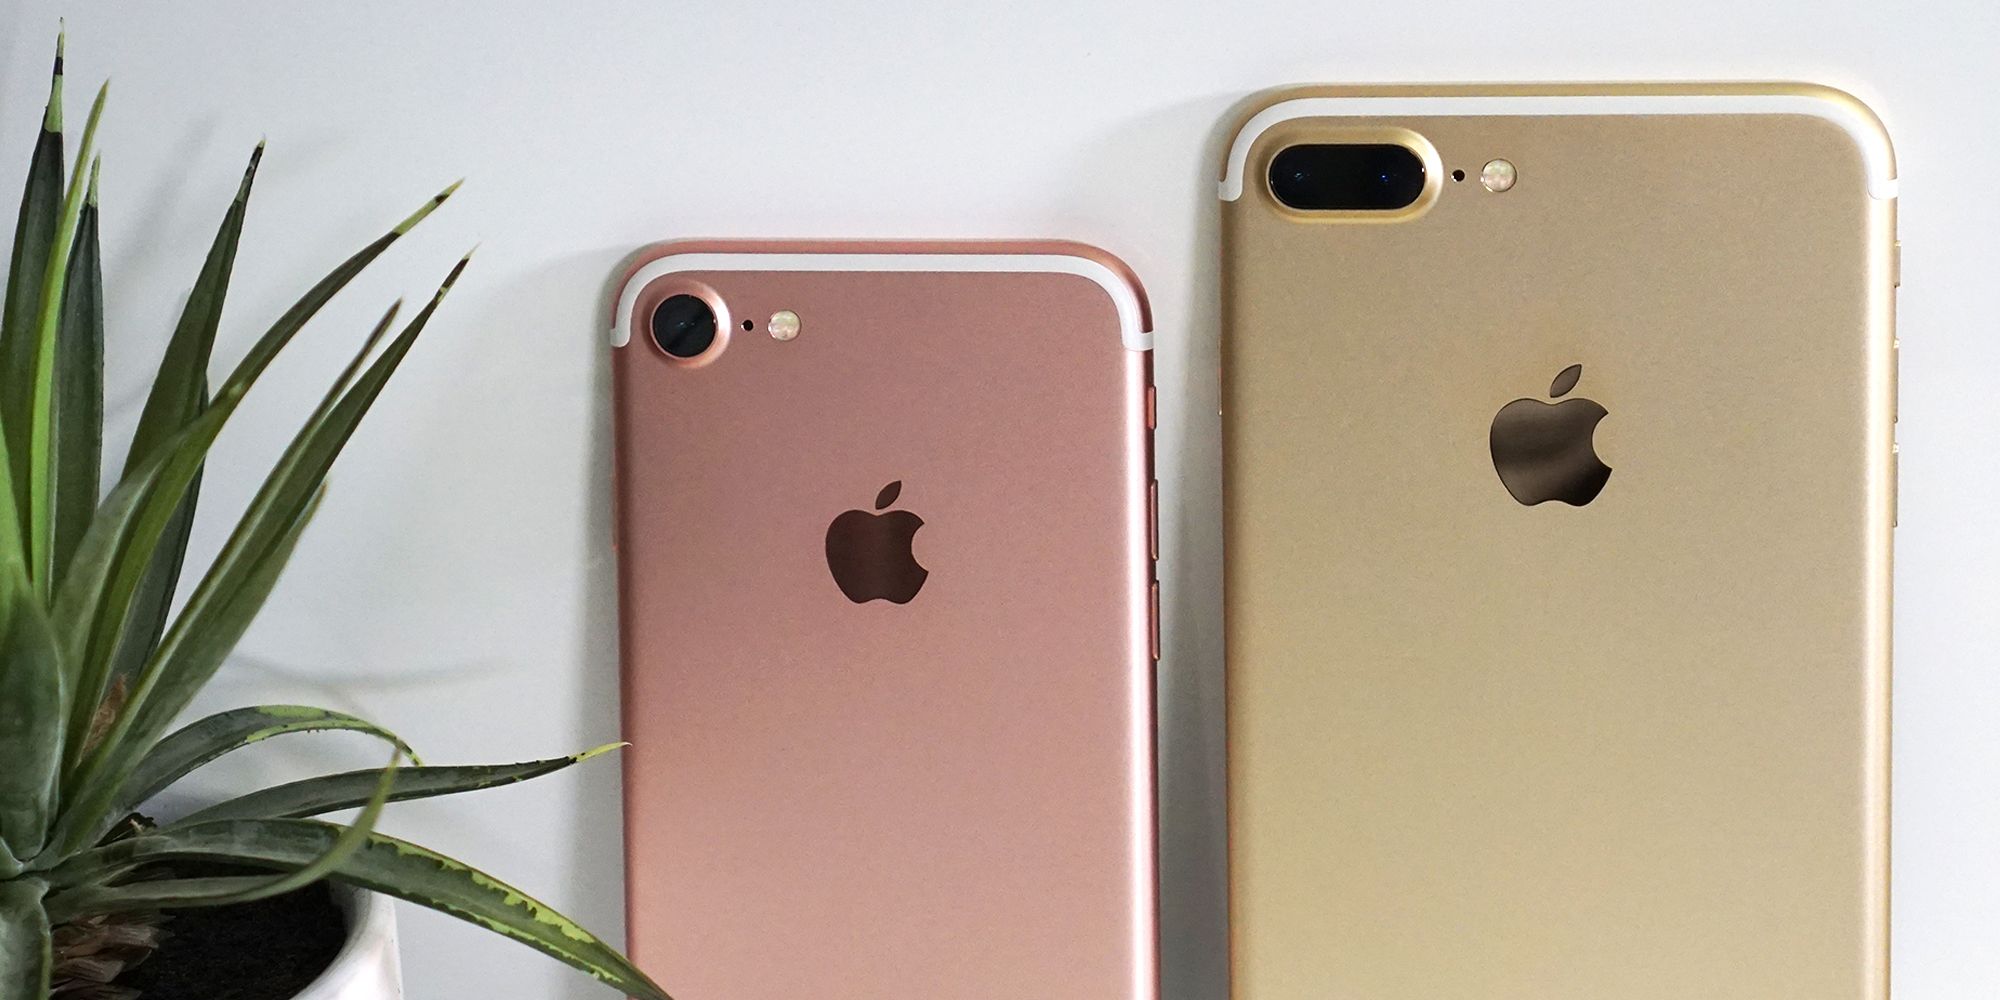 iPhone 7 and iPhone 7 Plus: the review